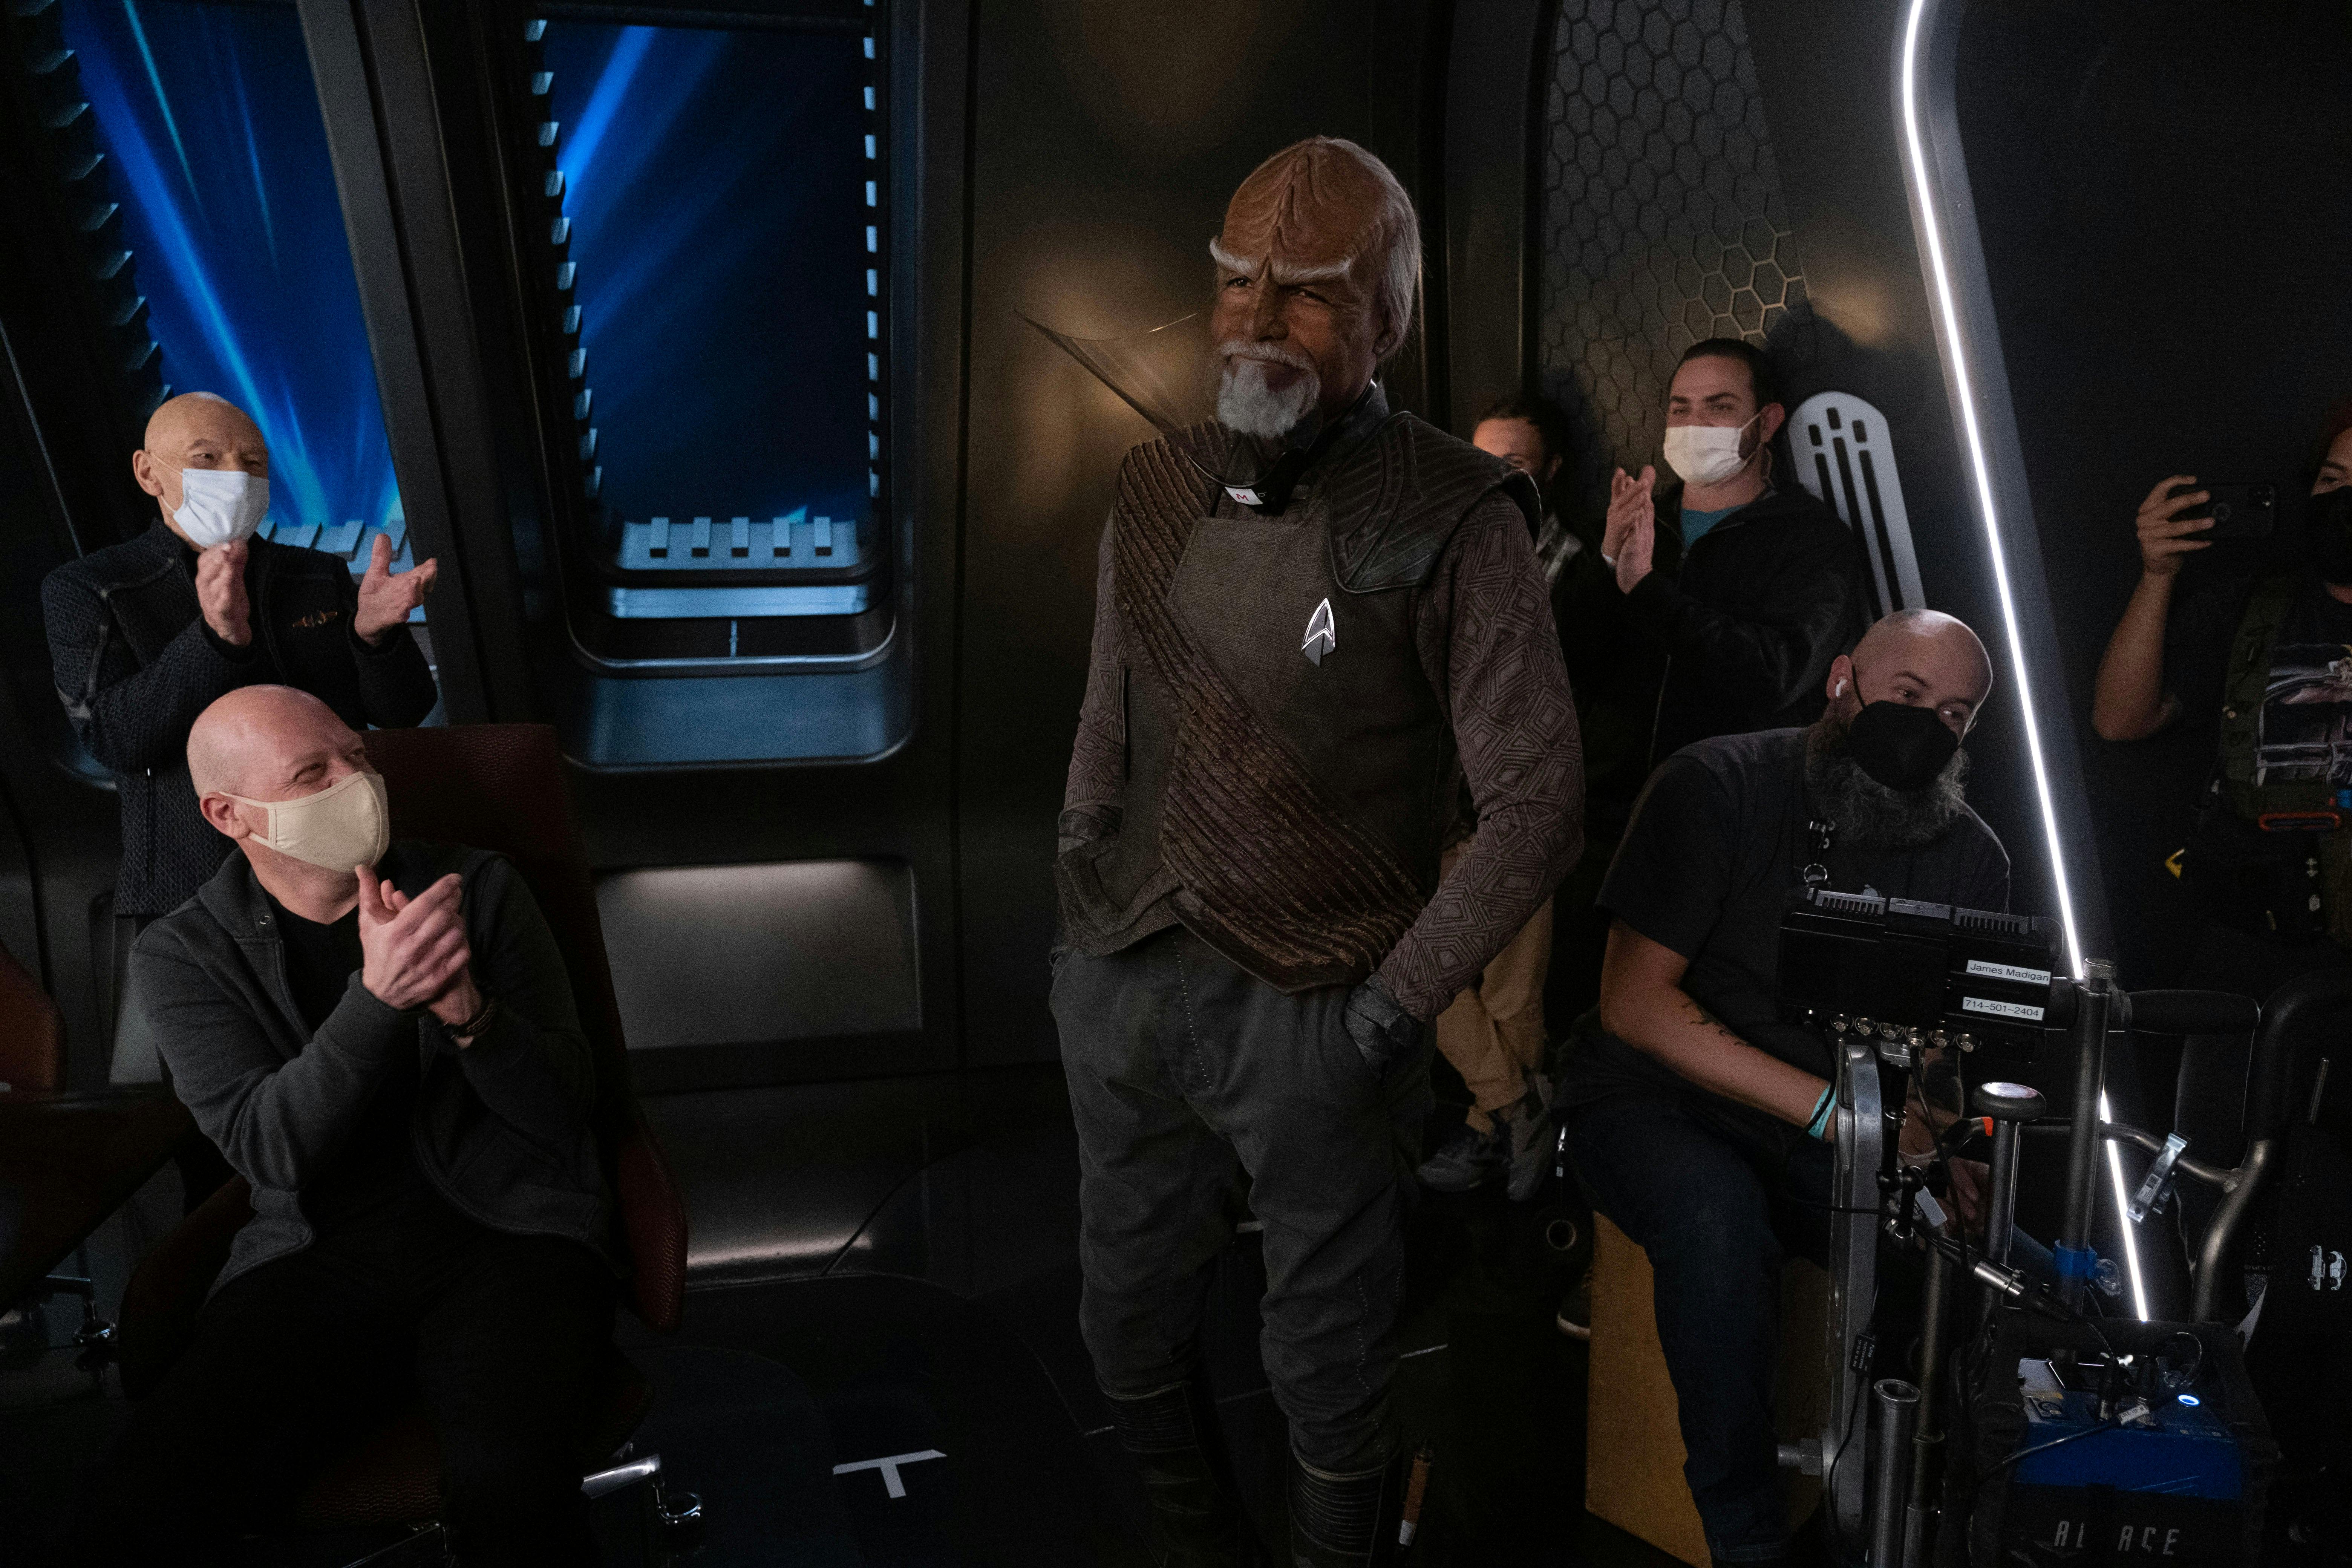 Star Trek: Picard BTS still - crew smile and clap as they all face Michael Dorn in the Observation Lounge set